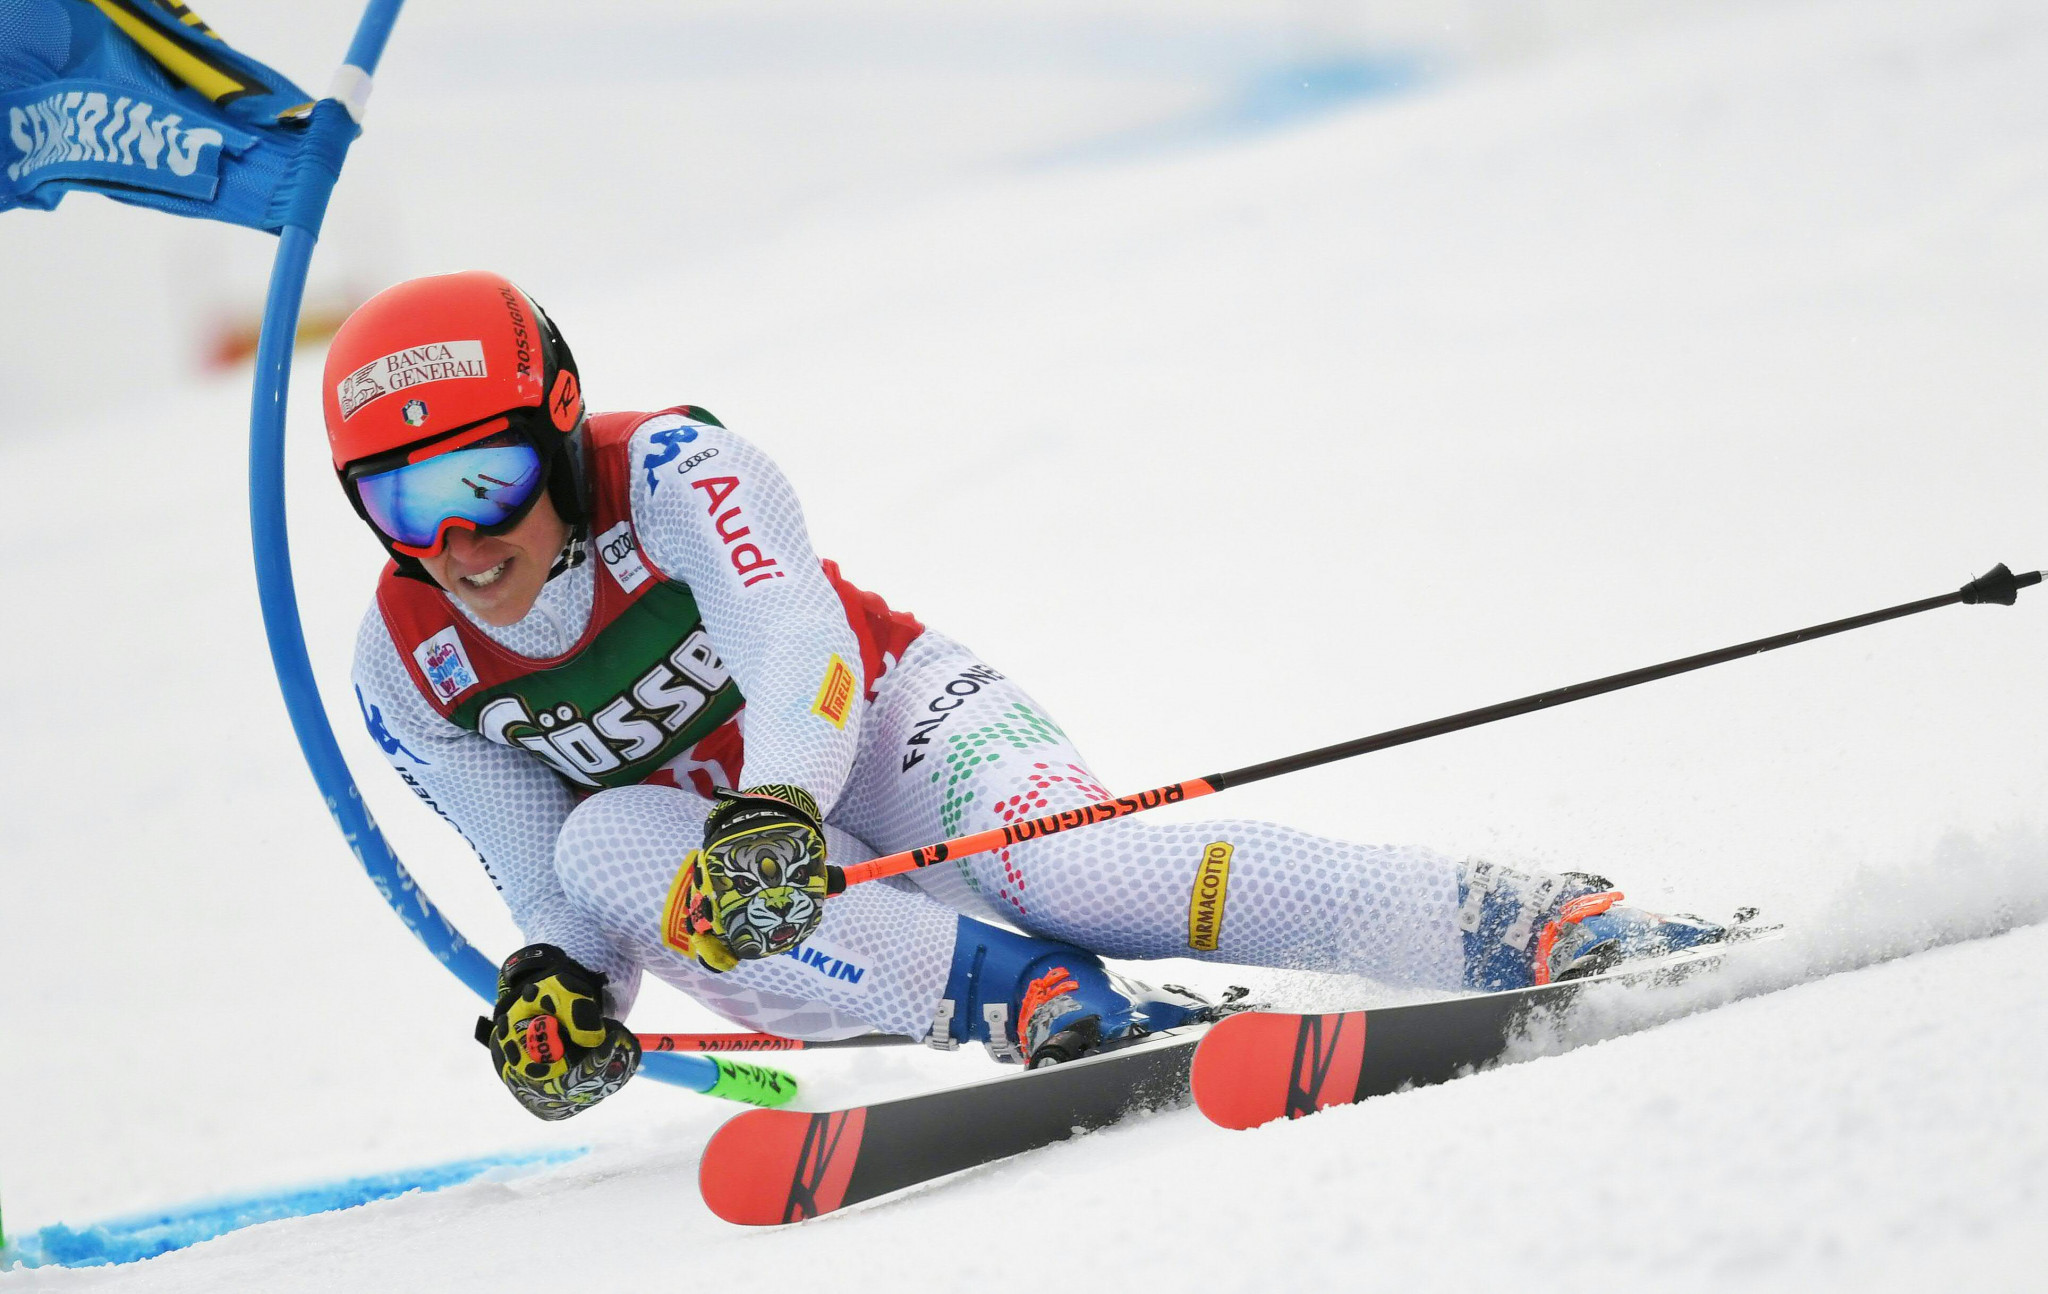 Kronplatz to stage fifth women's giant slalom competition of FIS Alpine Skiing World Cup season